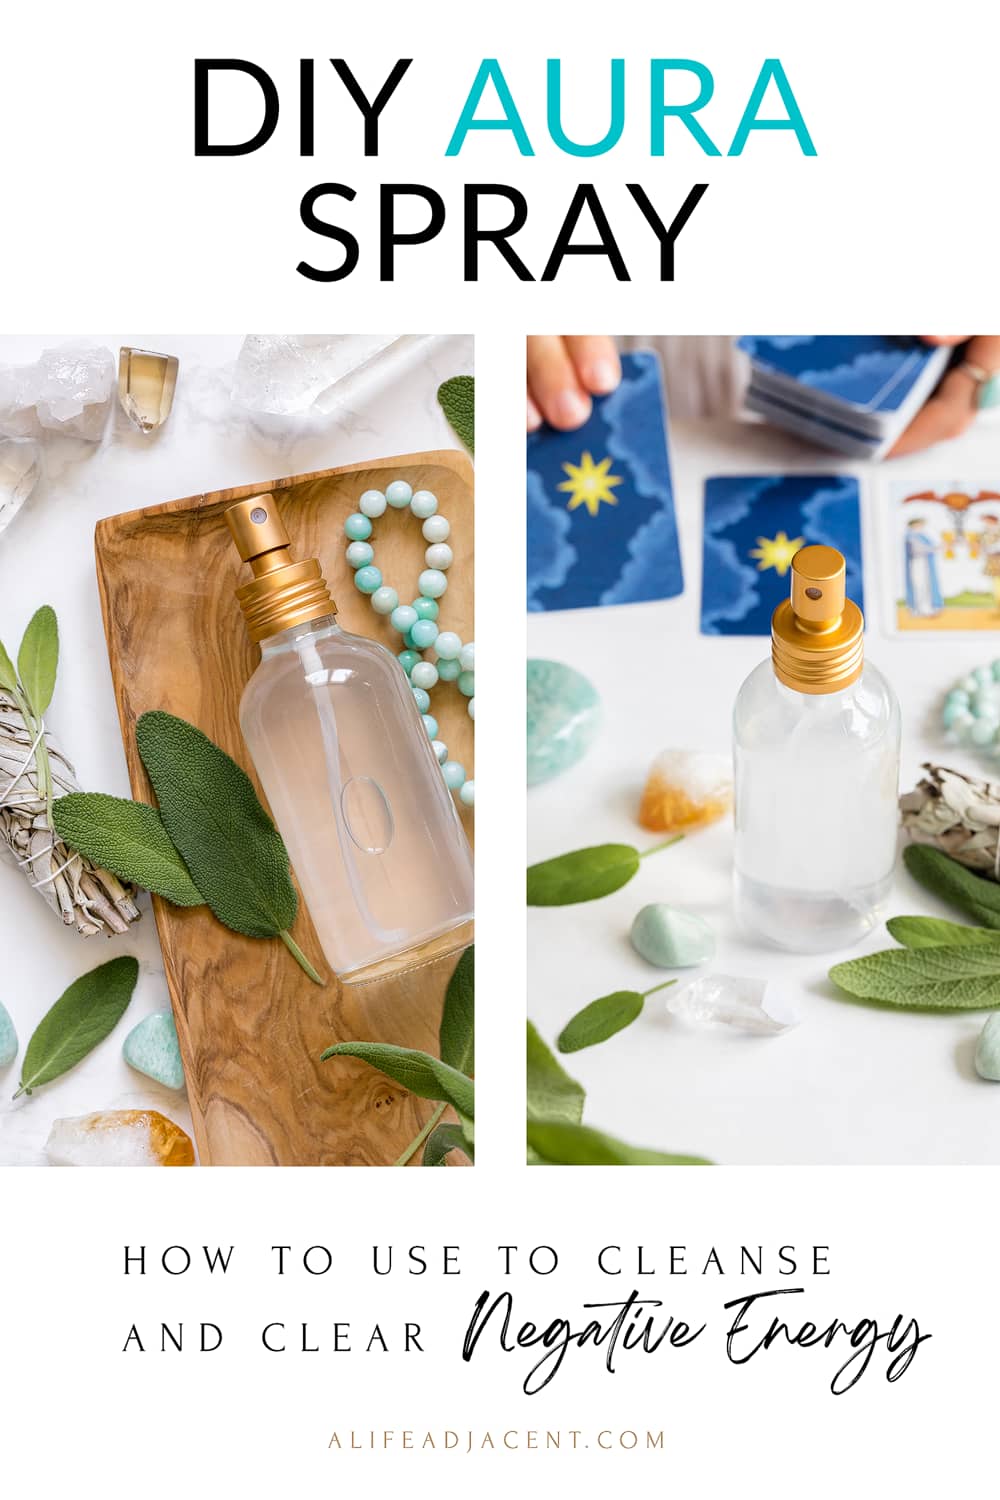 DIY Aura Spray – How to Use to Cleanse and Clear Negative Energy